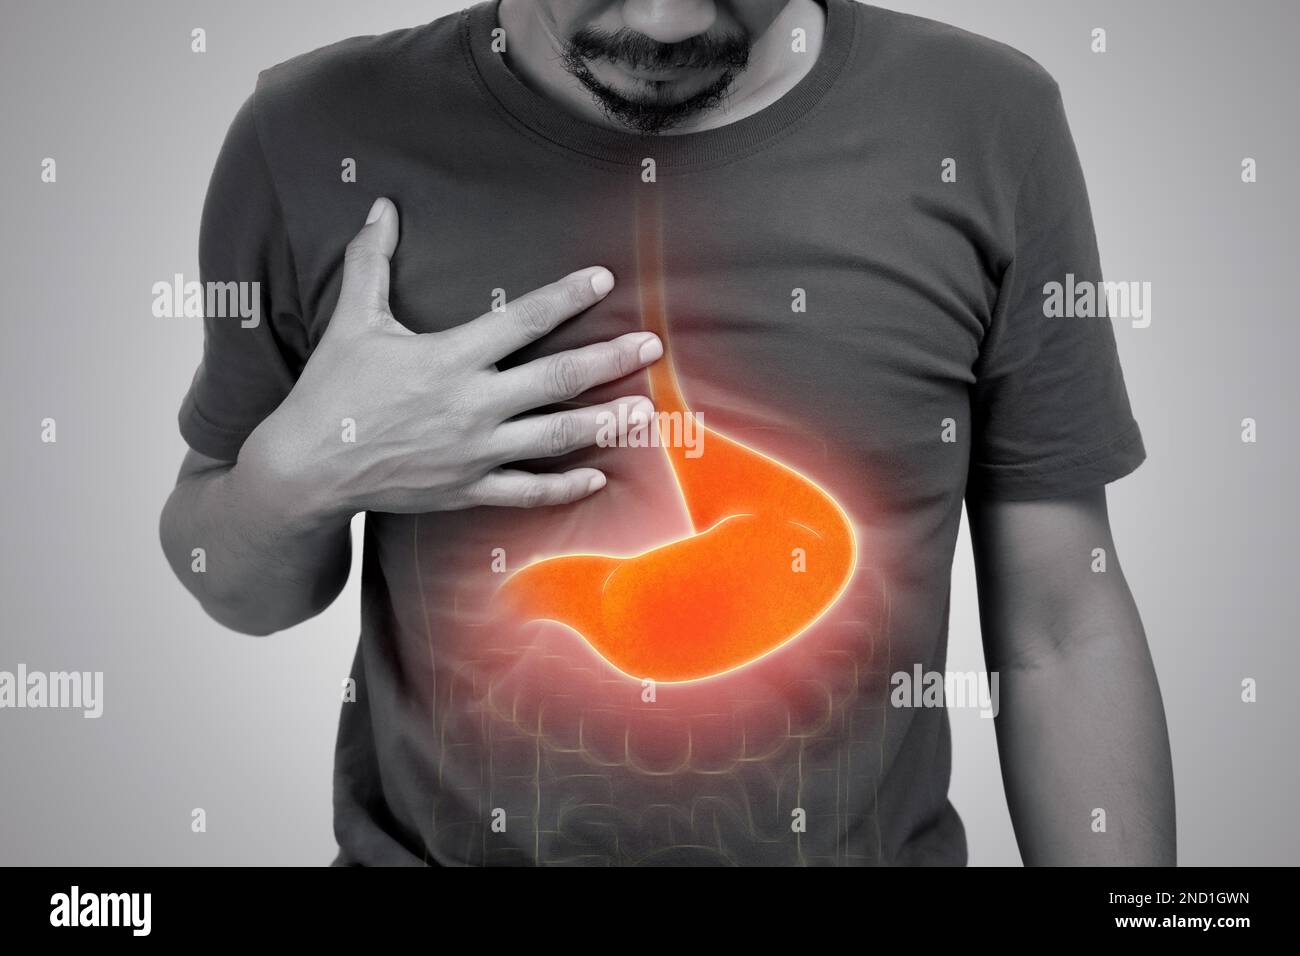 Asian man suffering from gastritis on gray background. Stock Photo